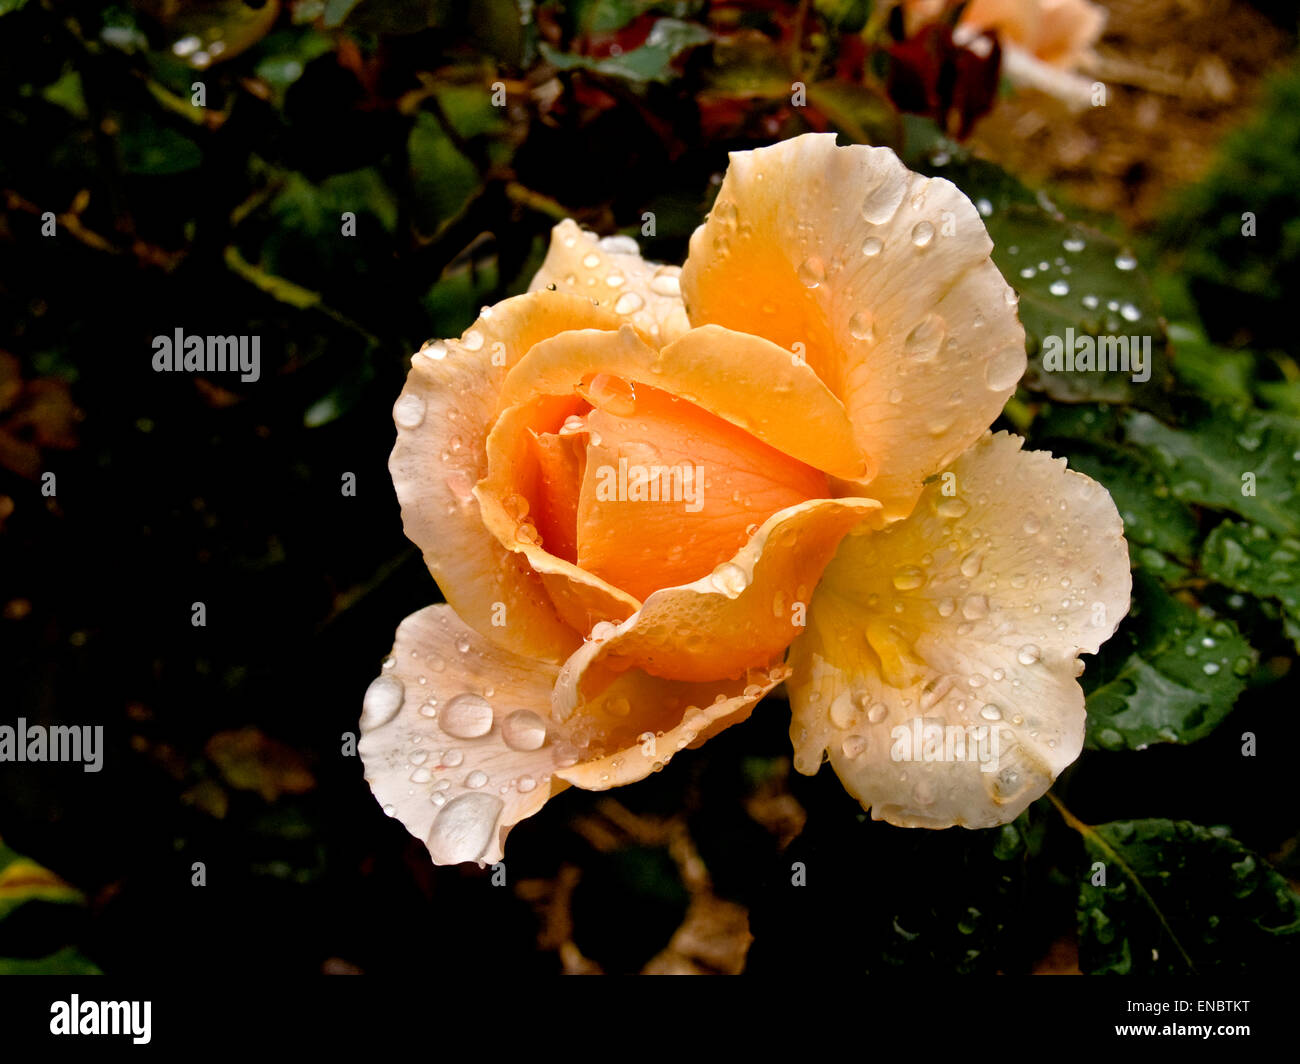 Apricot rose flower with raindrops Stock Photo